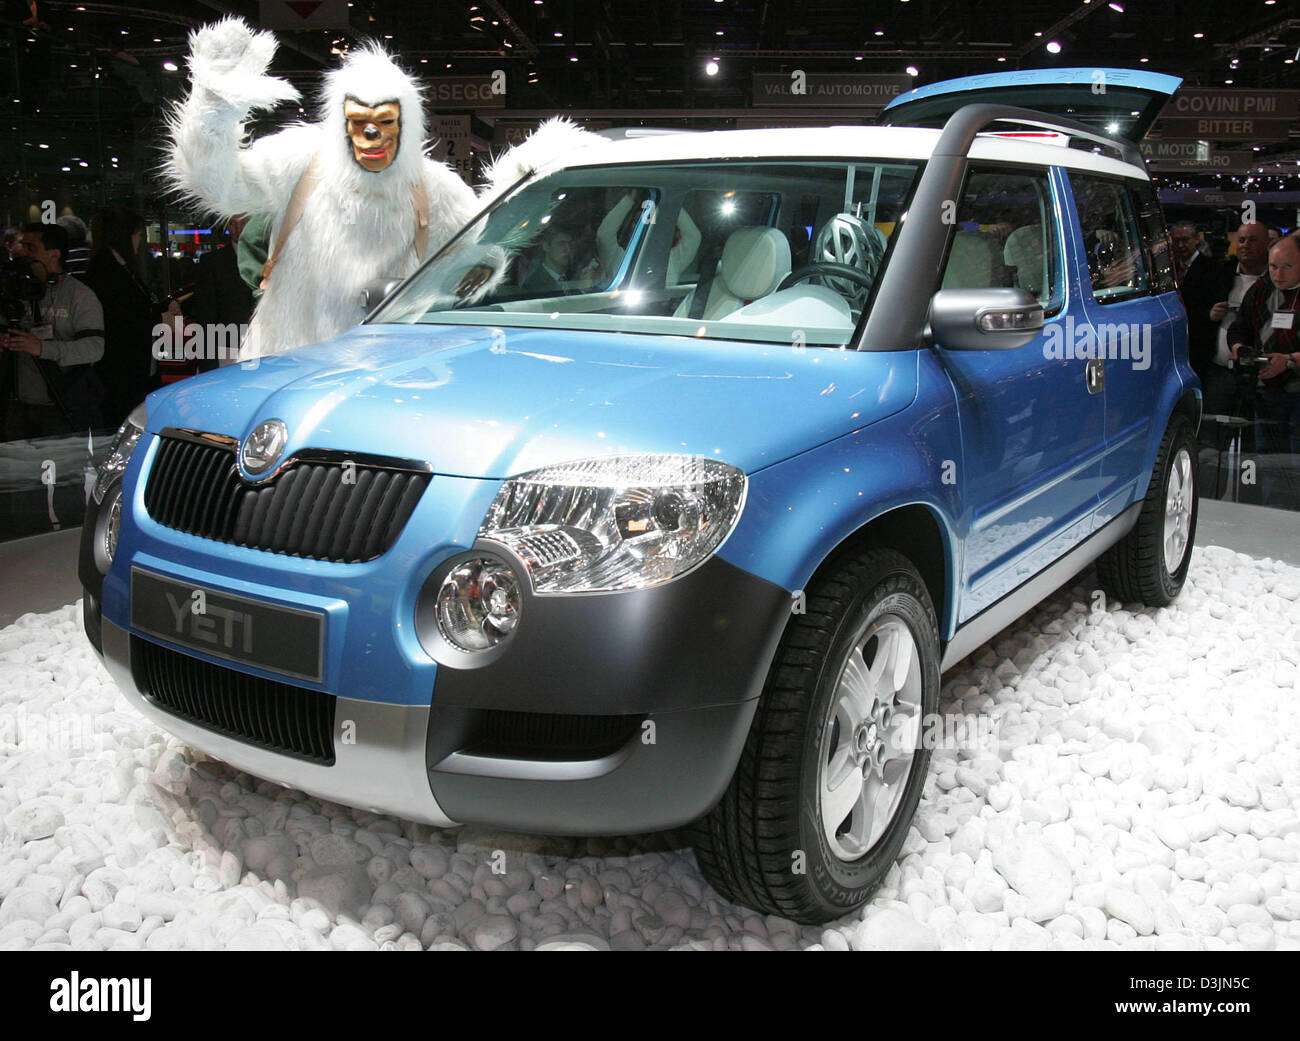 dpa) - A person dressed as a yeti poses next to the SUV concept car by Skoda  named 'Yeti' at the 'Autosalon', car exhibition, in Geneva, Switzerland,  Tuesday, 01 March 2005. Visitors